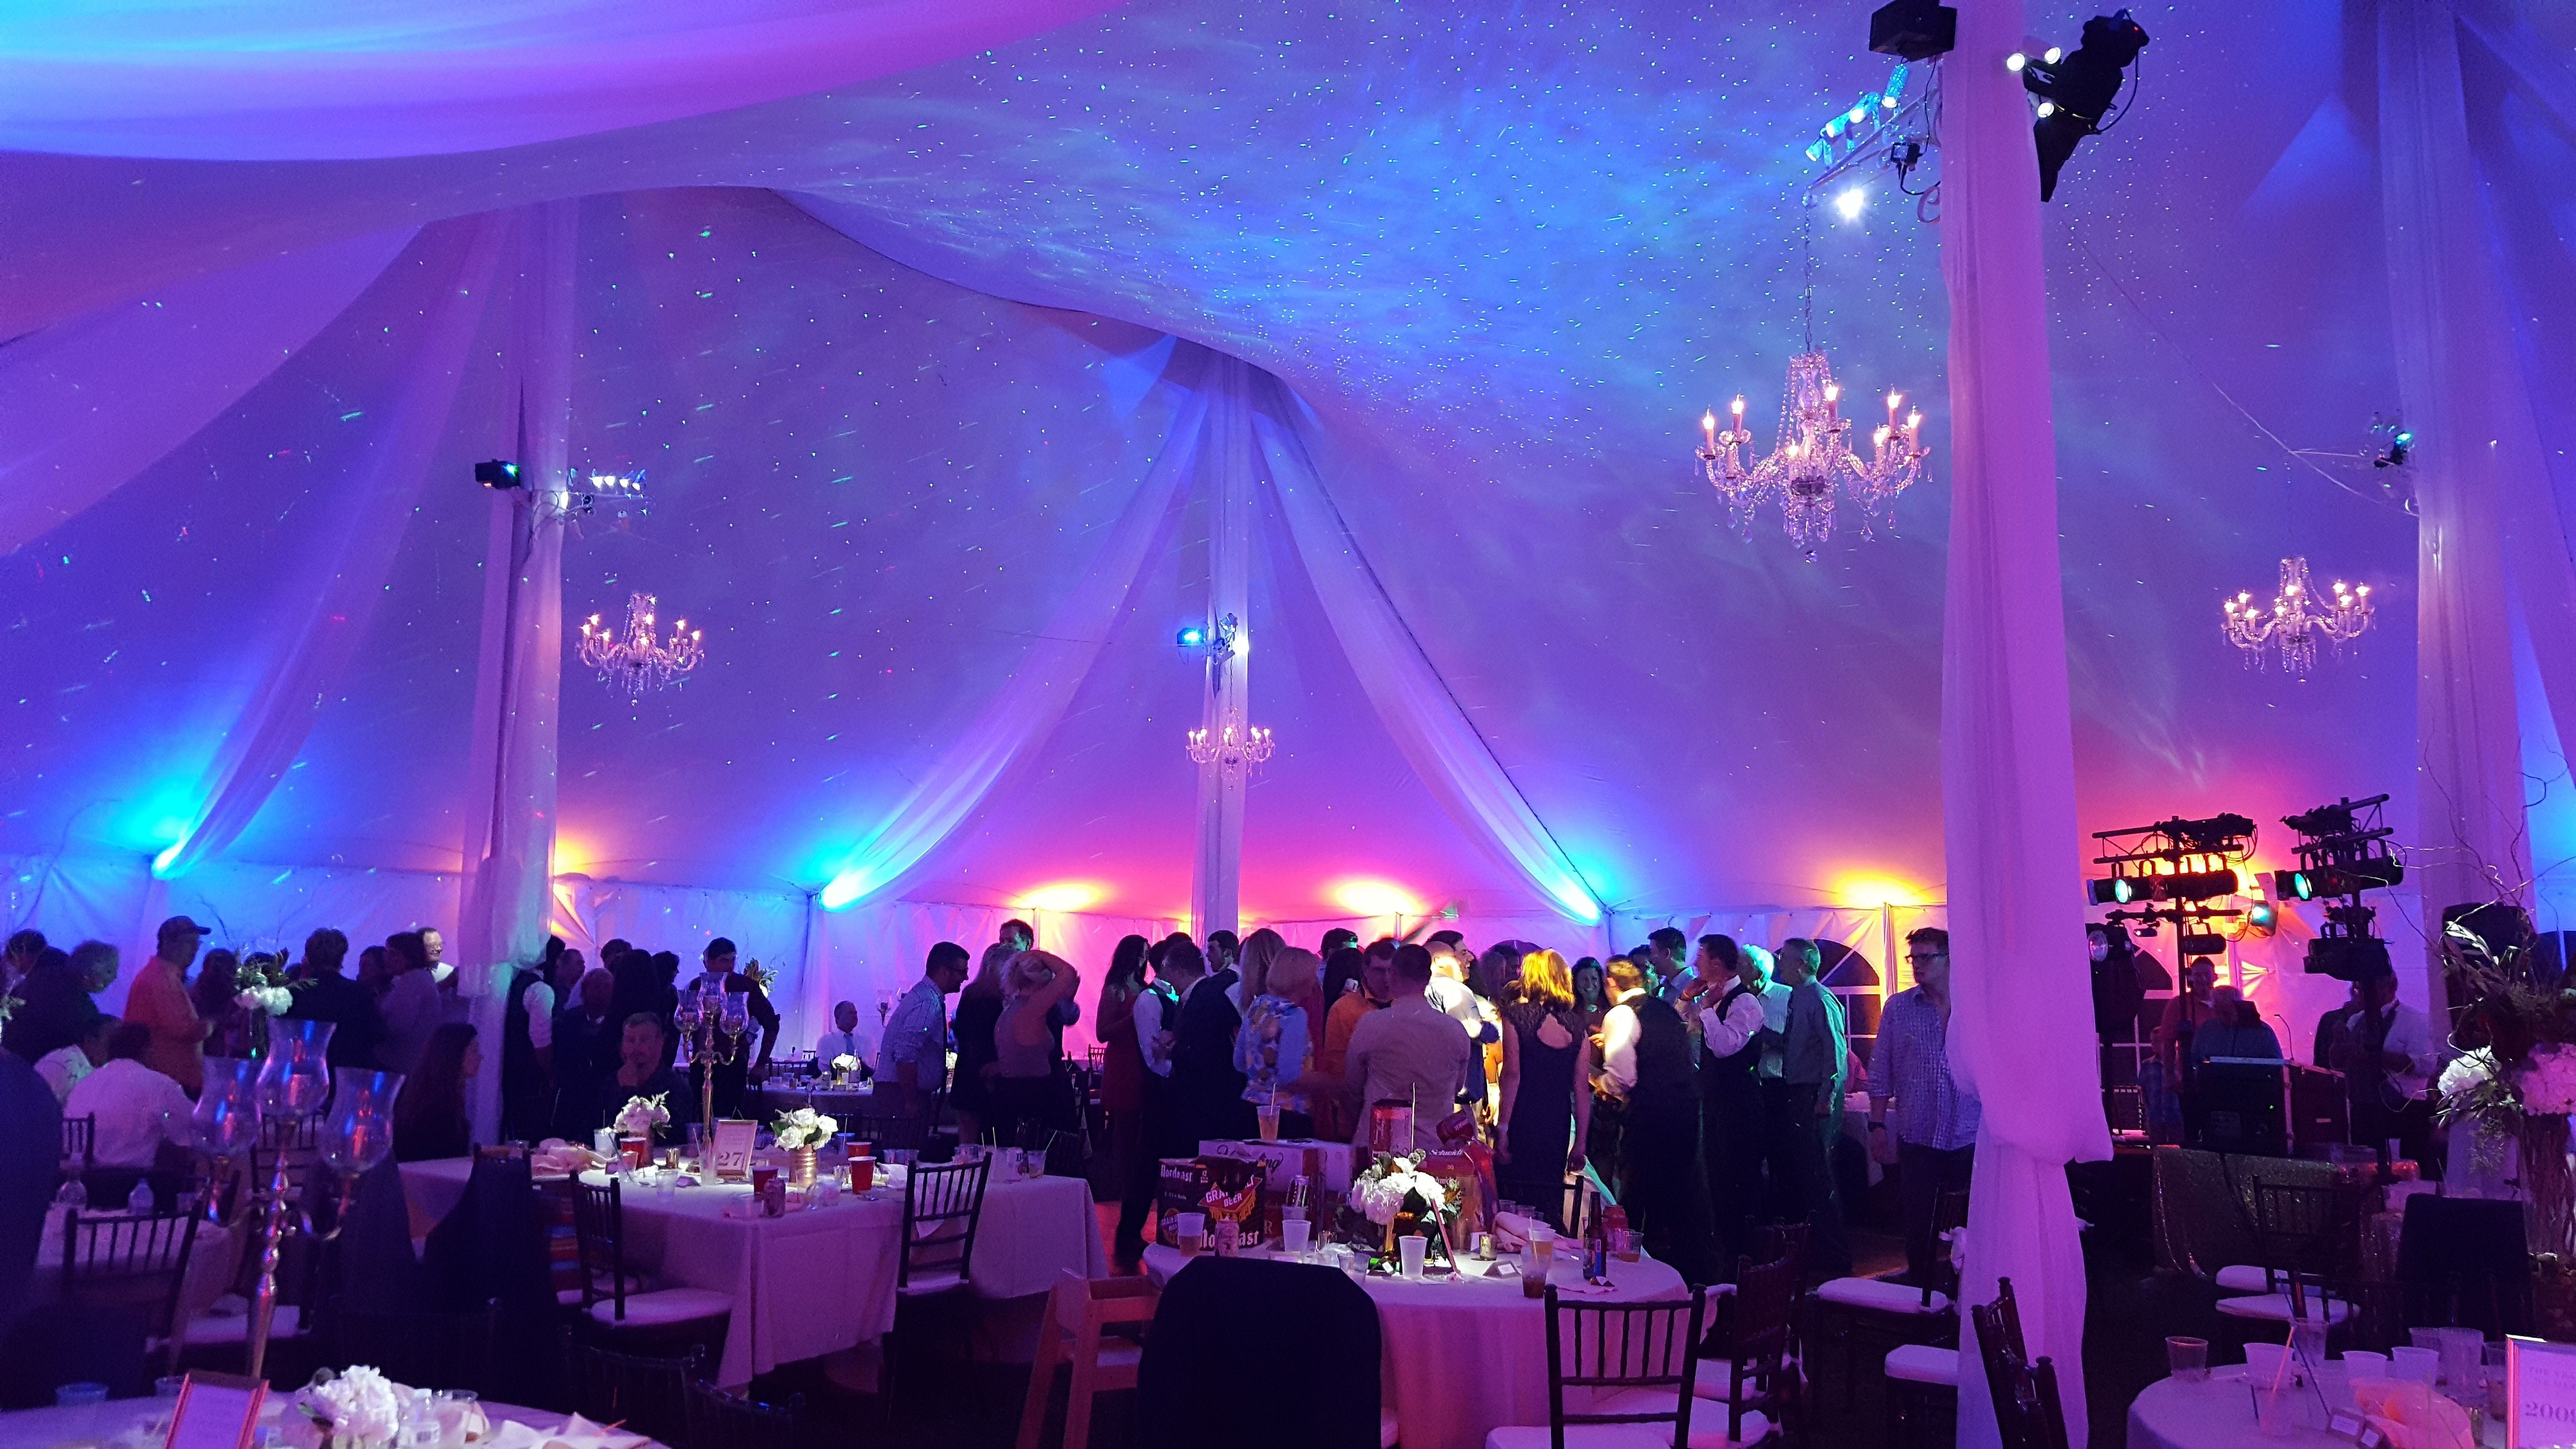 A Tent wedding with the stars and Northern Lights dancing on the Tent ceiling.